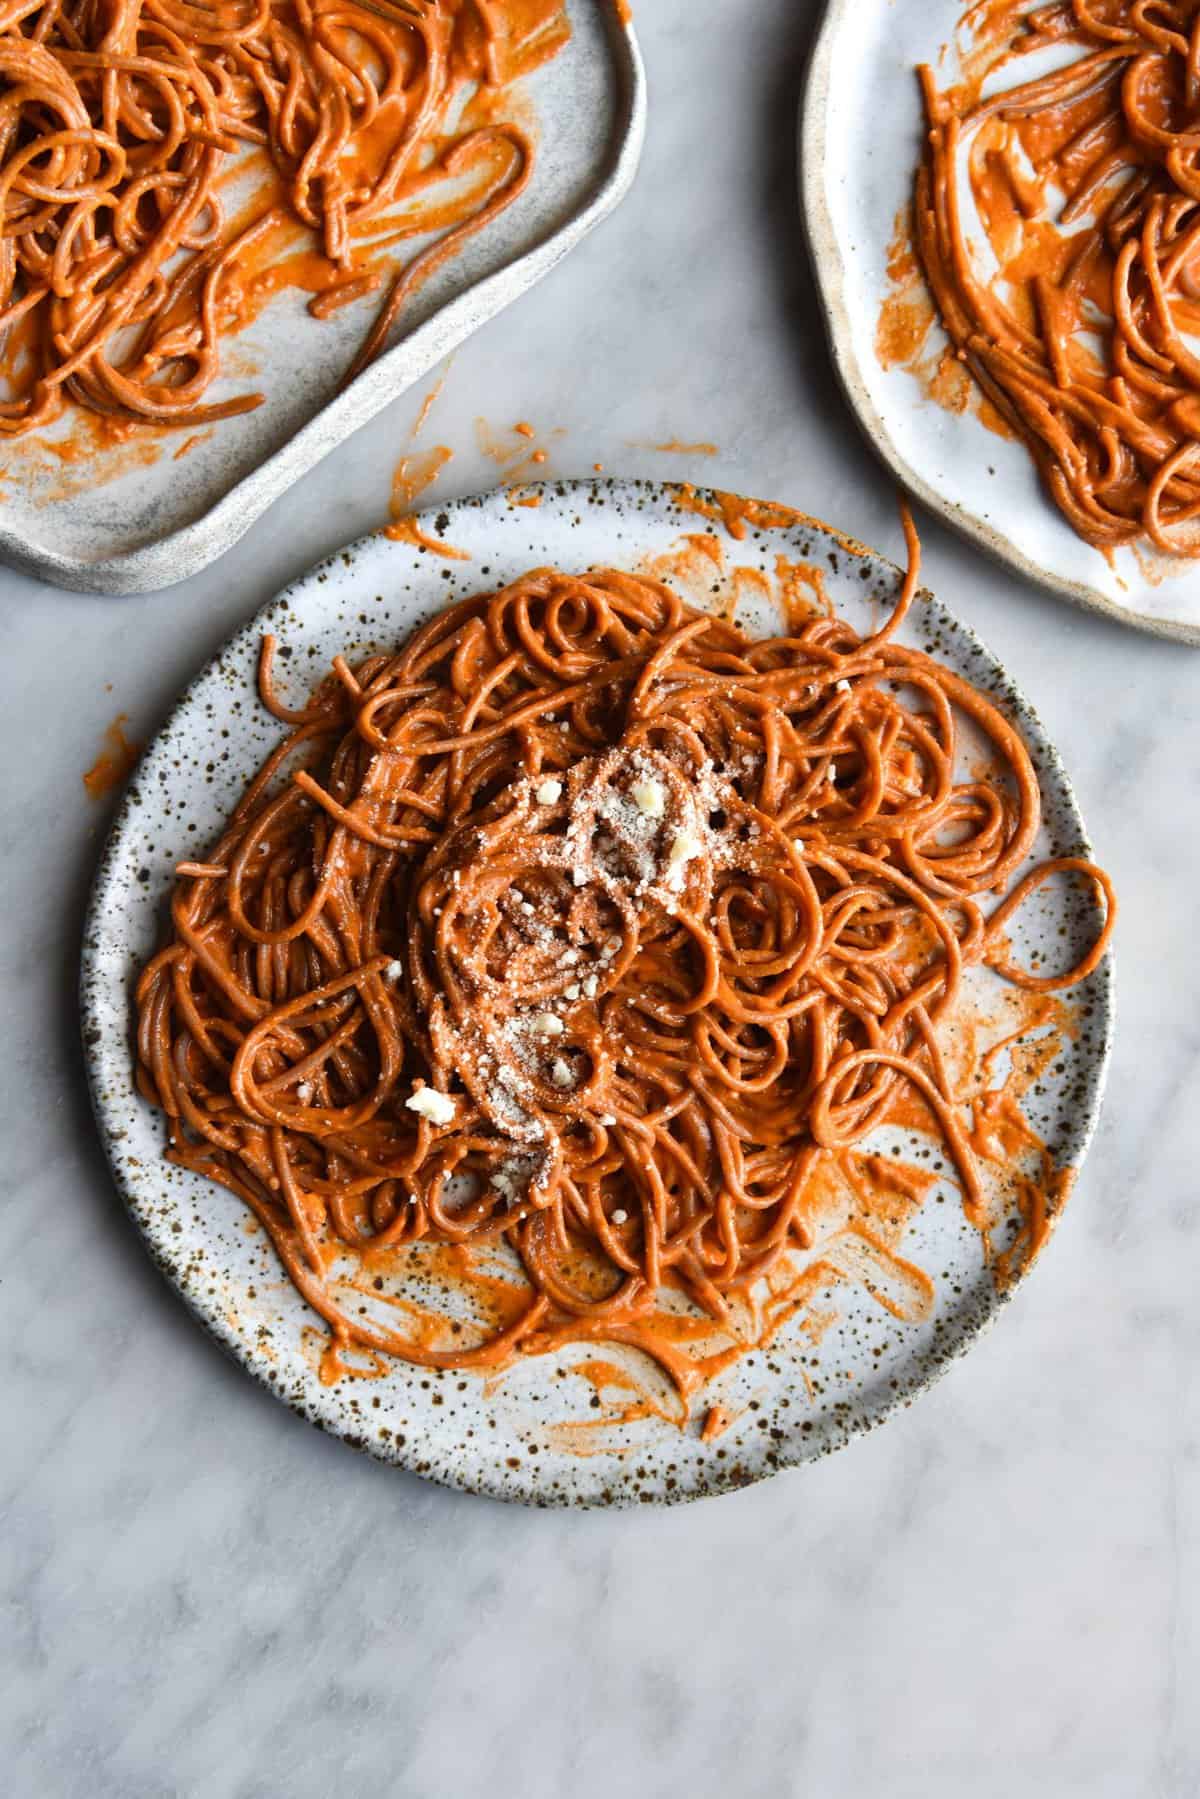 Three white ceramic plates of FODMAP friendly Pasta Alla Vodka on a white marble table. The pasta is topped with extra finely grated Parmesan cheese.